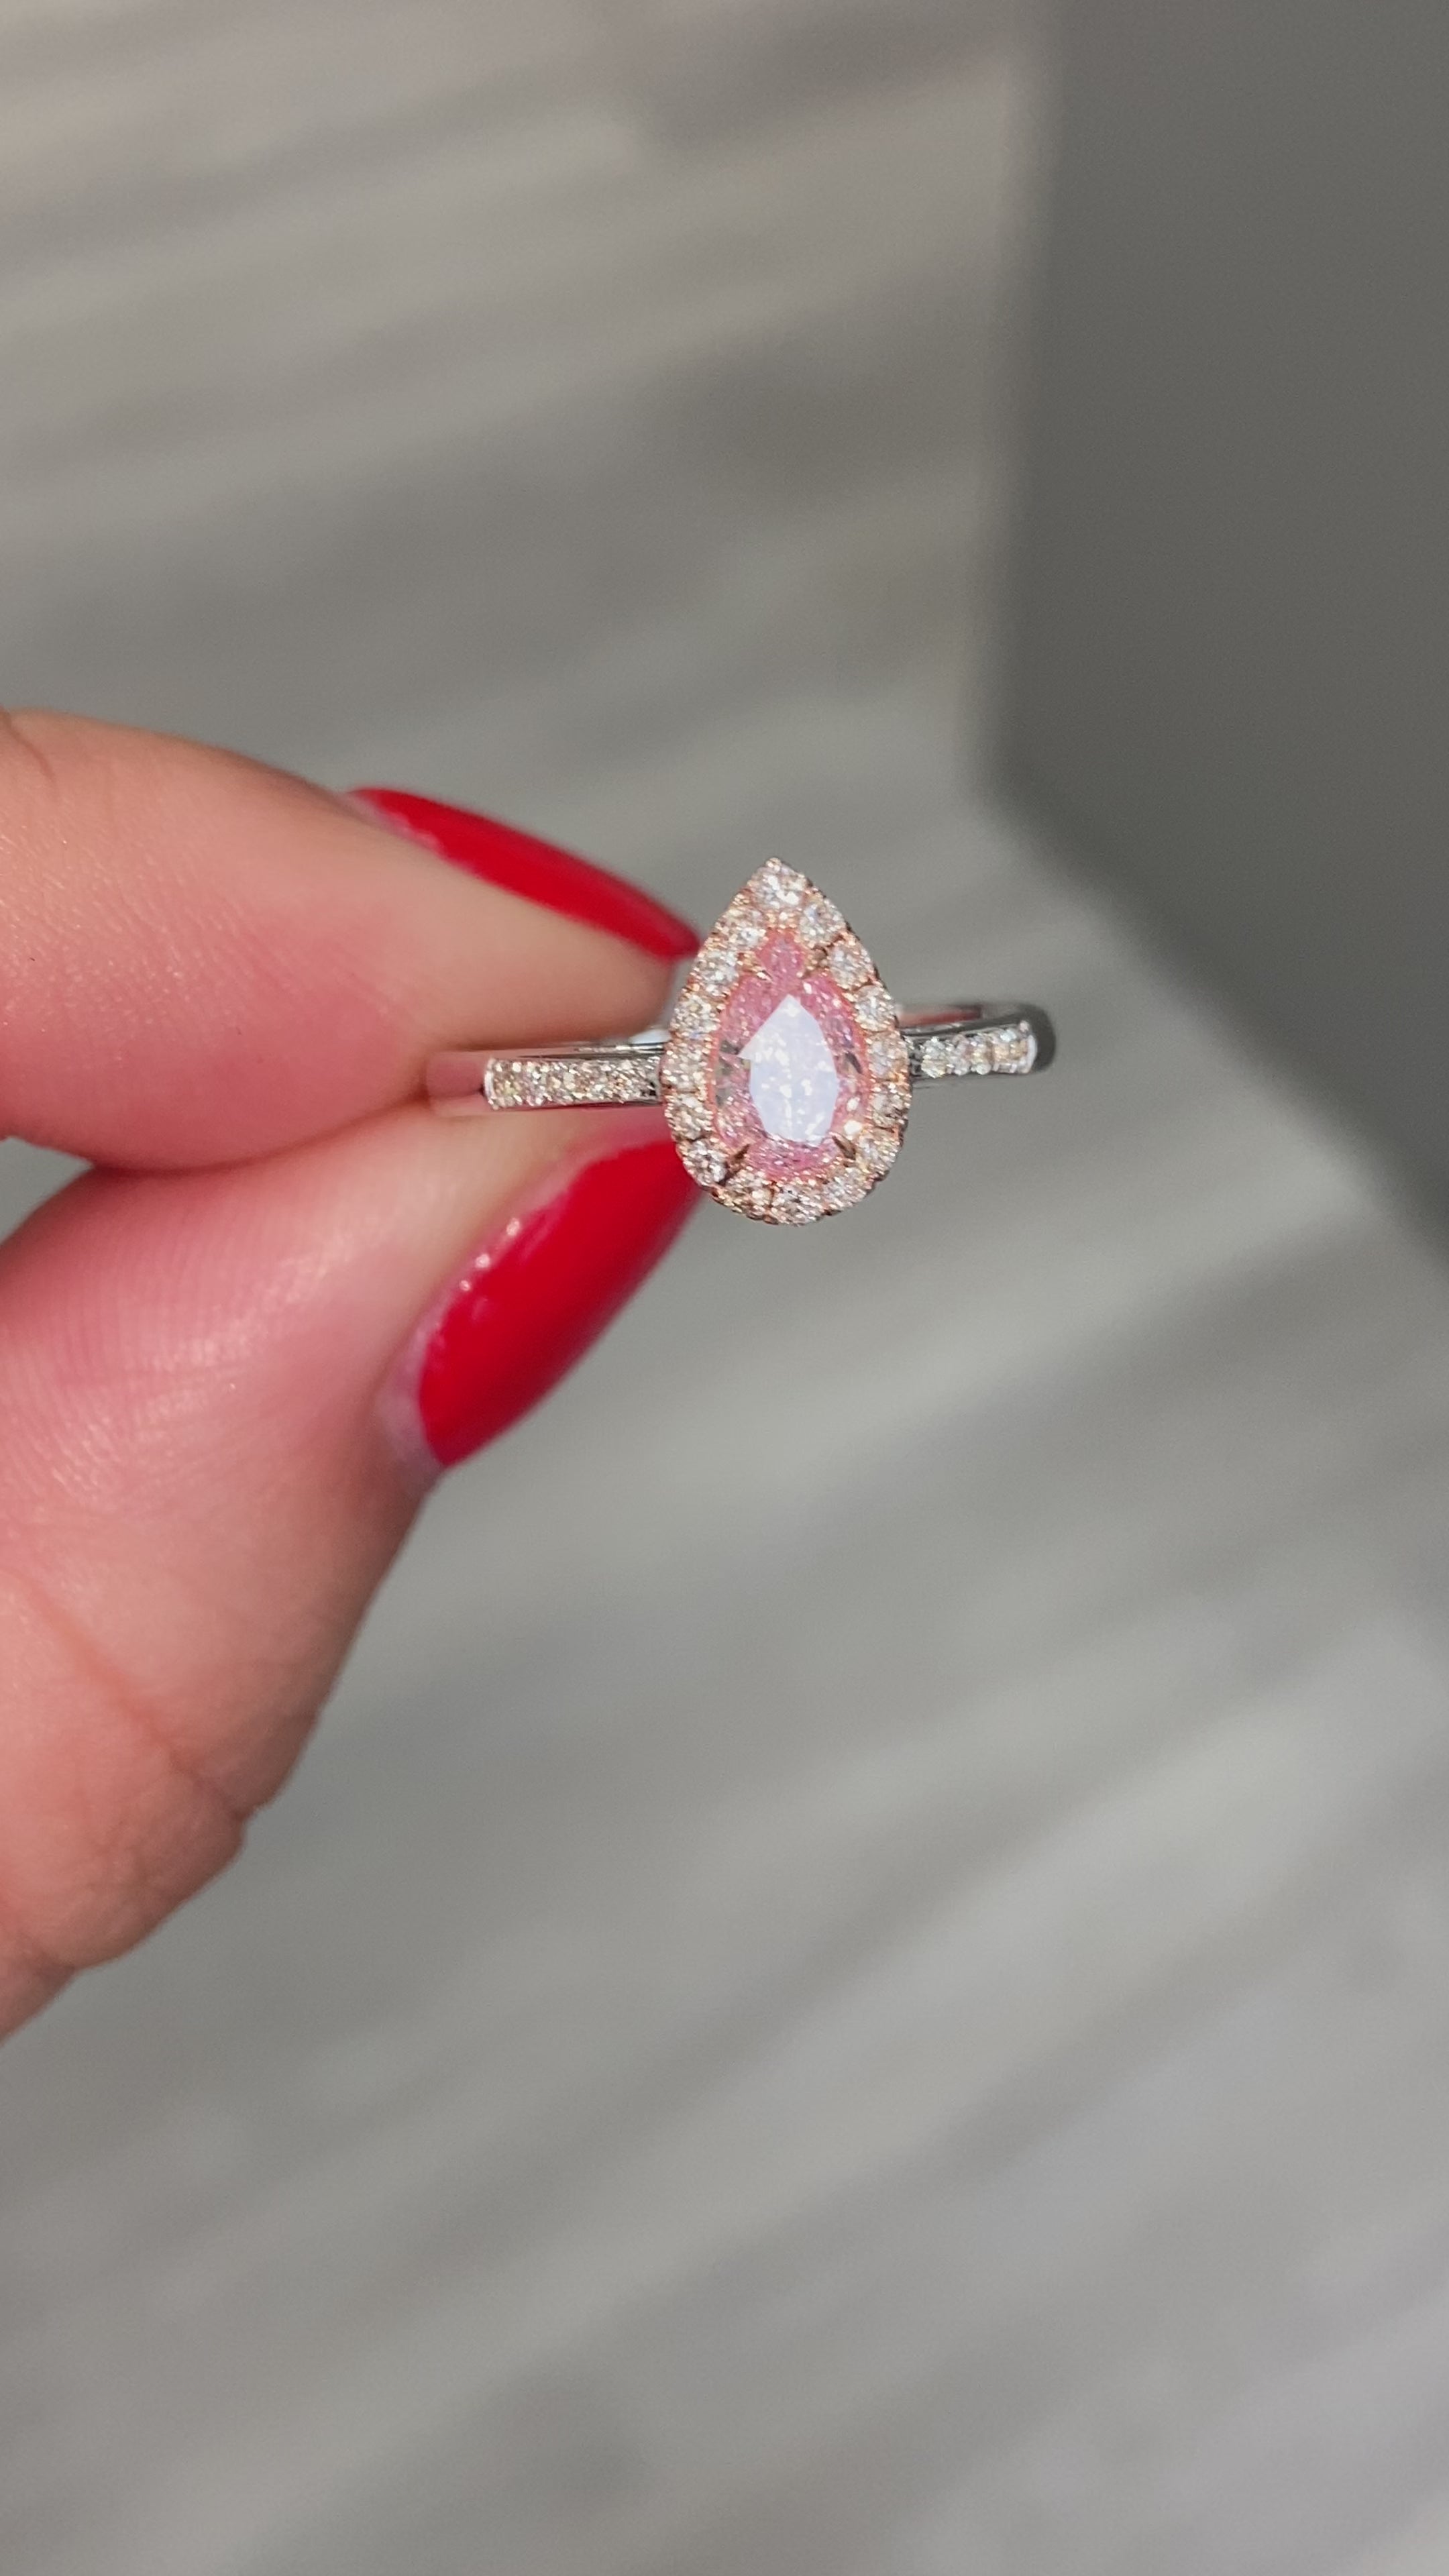 Tiffany Soleste double halo engagement ring with pink diamonds in platinum.